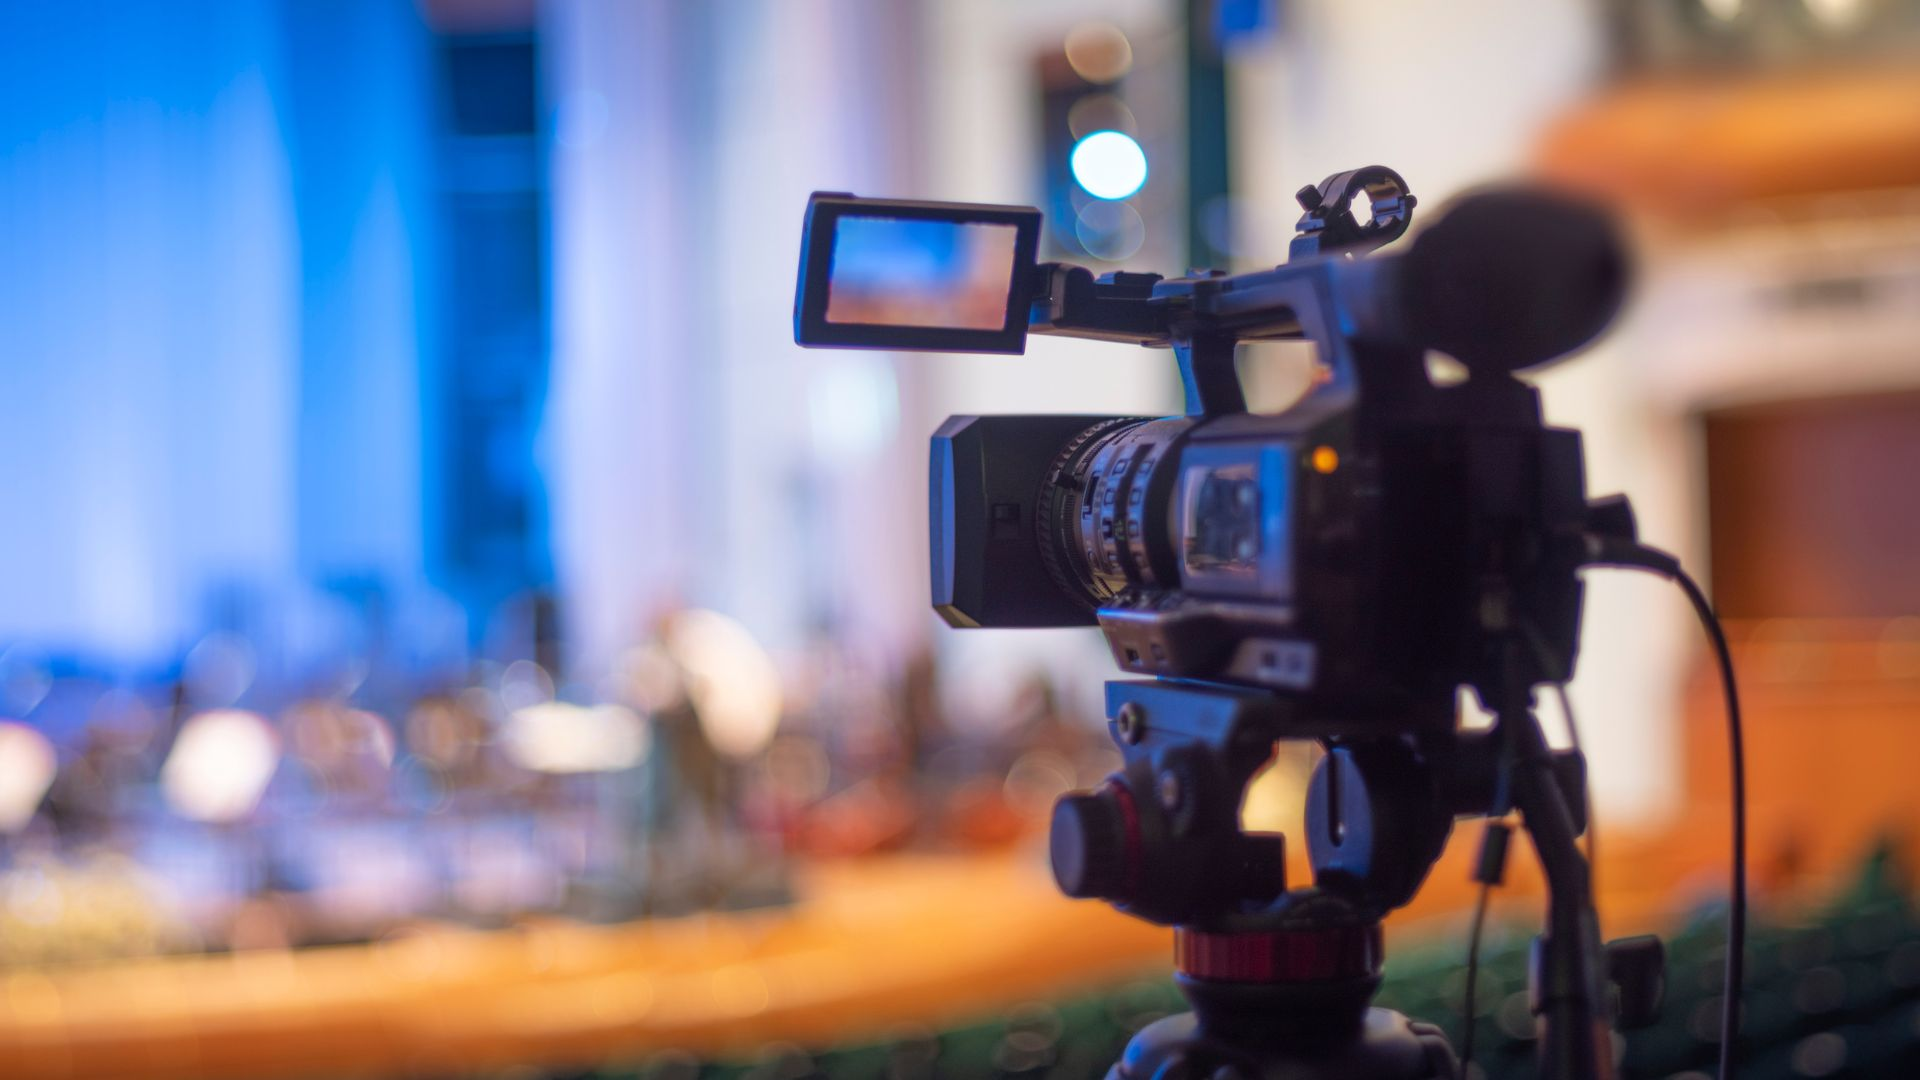 The Ultimate Guide To Live Streaming Church Music Legally - REACHRIGHT